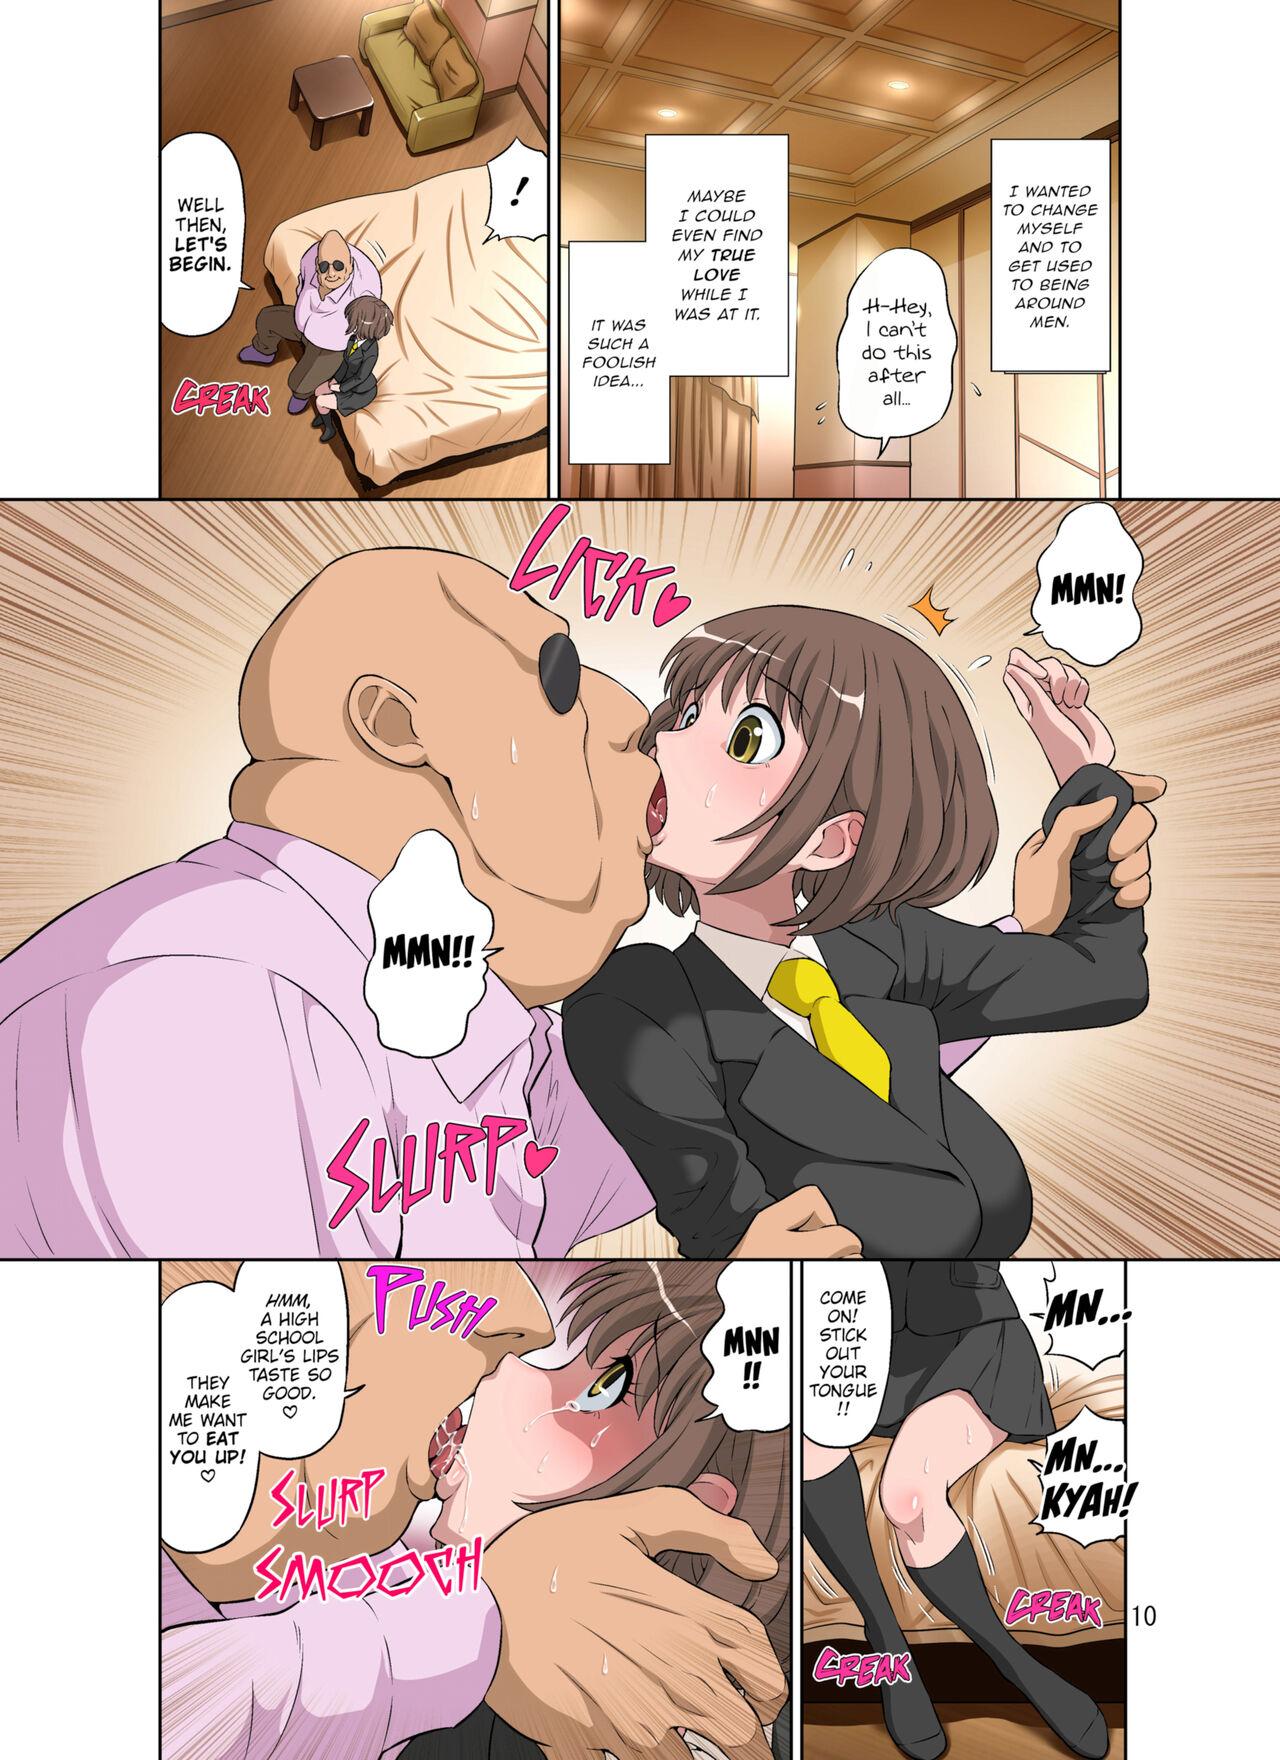 Boy Girl Stealing the Energetic Mom + Tanned Version - Original Gozo - Page 10